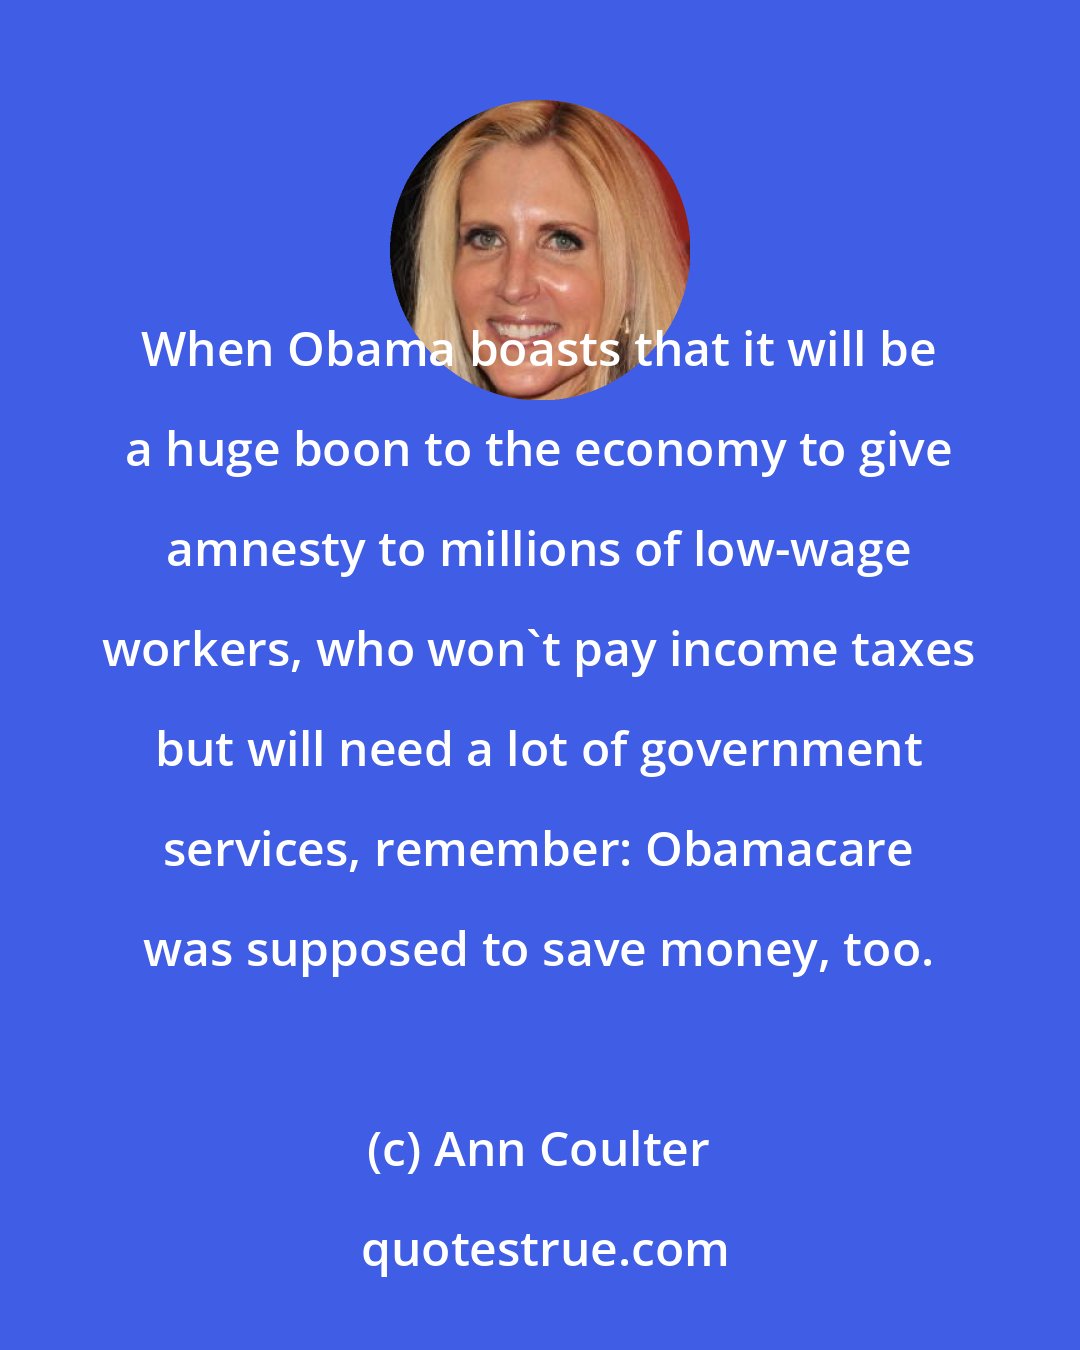 Ann Coulter: When Obama boasts that it will be a huge boon to the economy to give amnesty to millions of low-wage workers, who won't pay income taxes but will need a lot of government services, remember: Obamacare was supposed to save money, too.